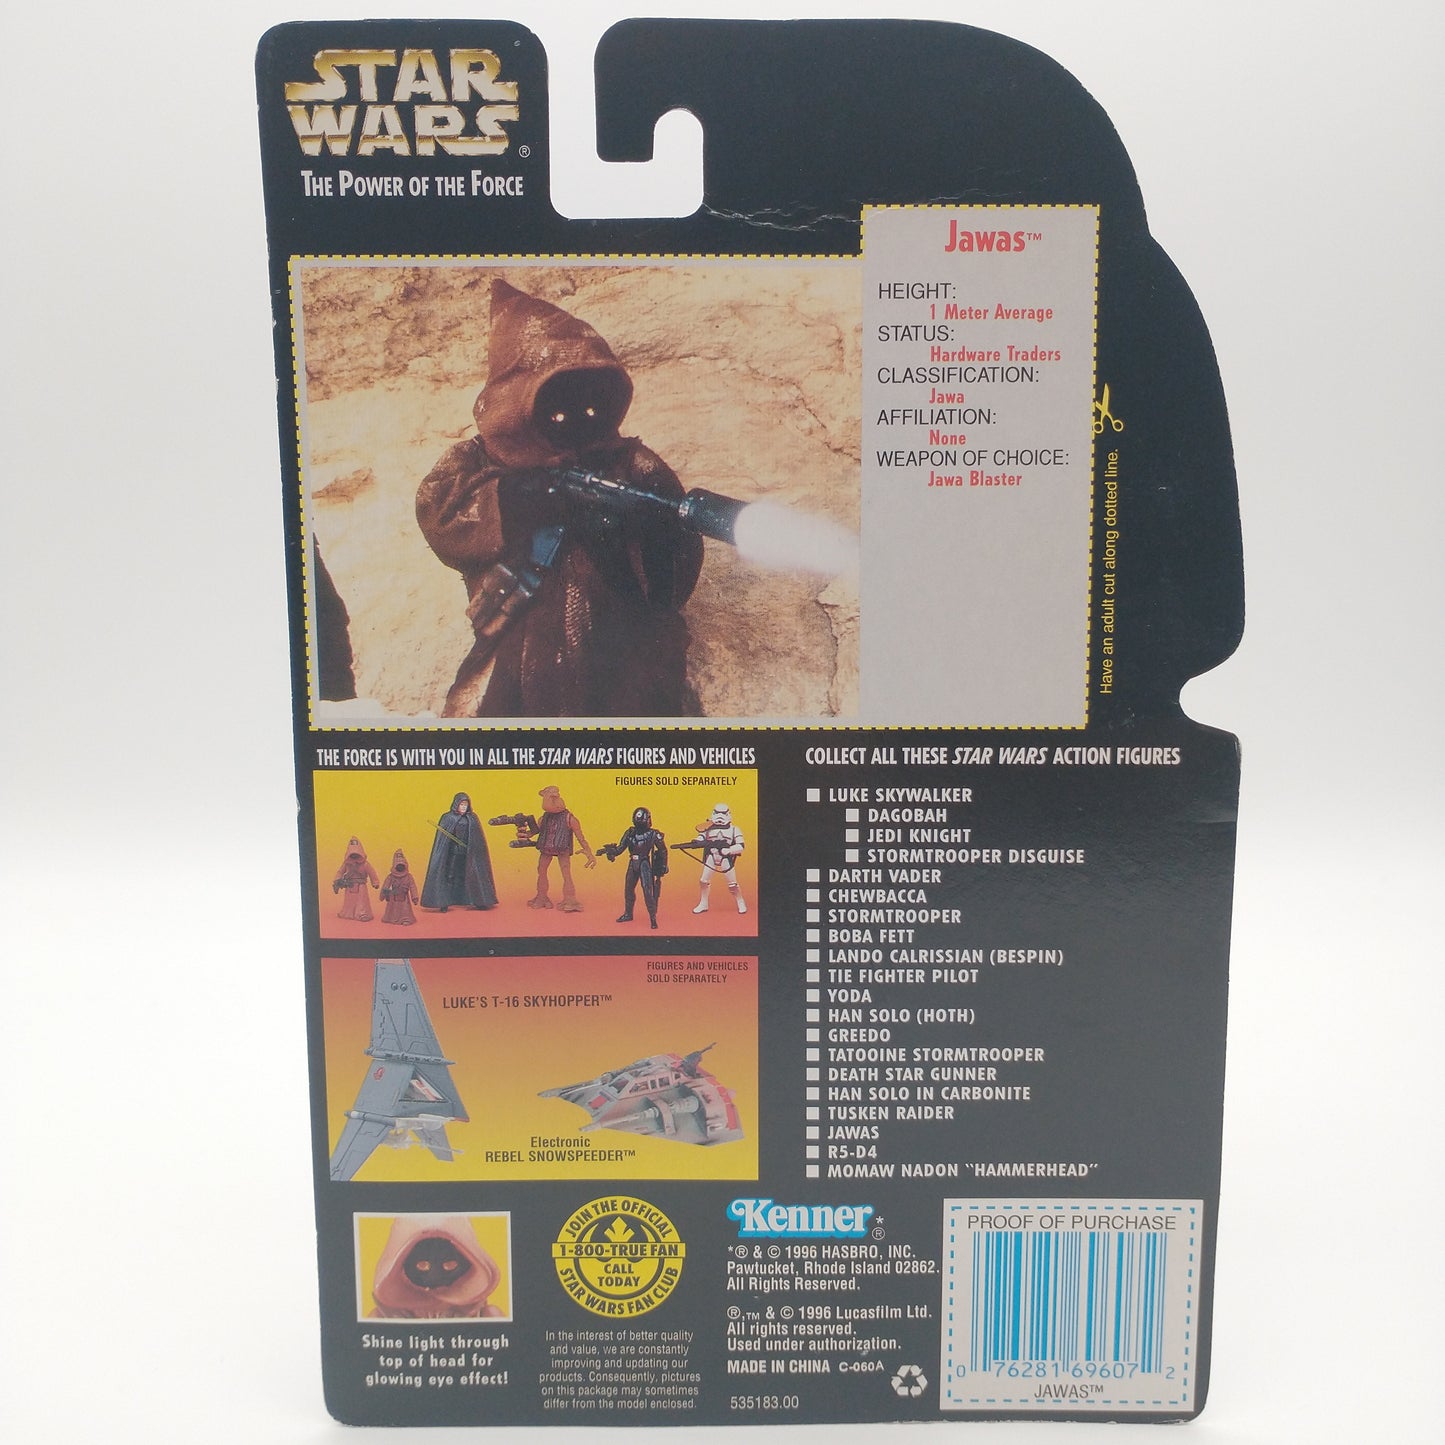 The back of the cart featuring images of the action figure and a summary of information about them. It is illegible in the picture.